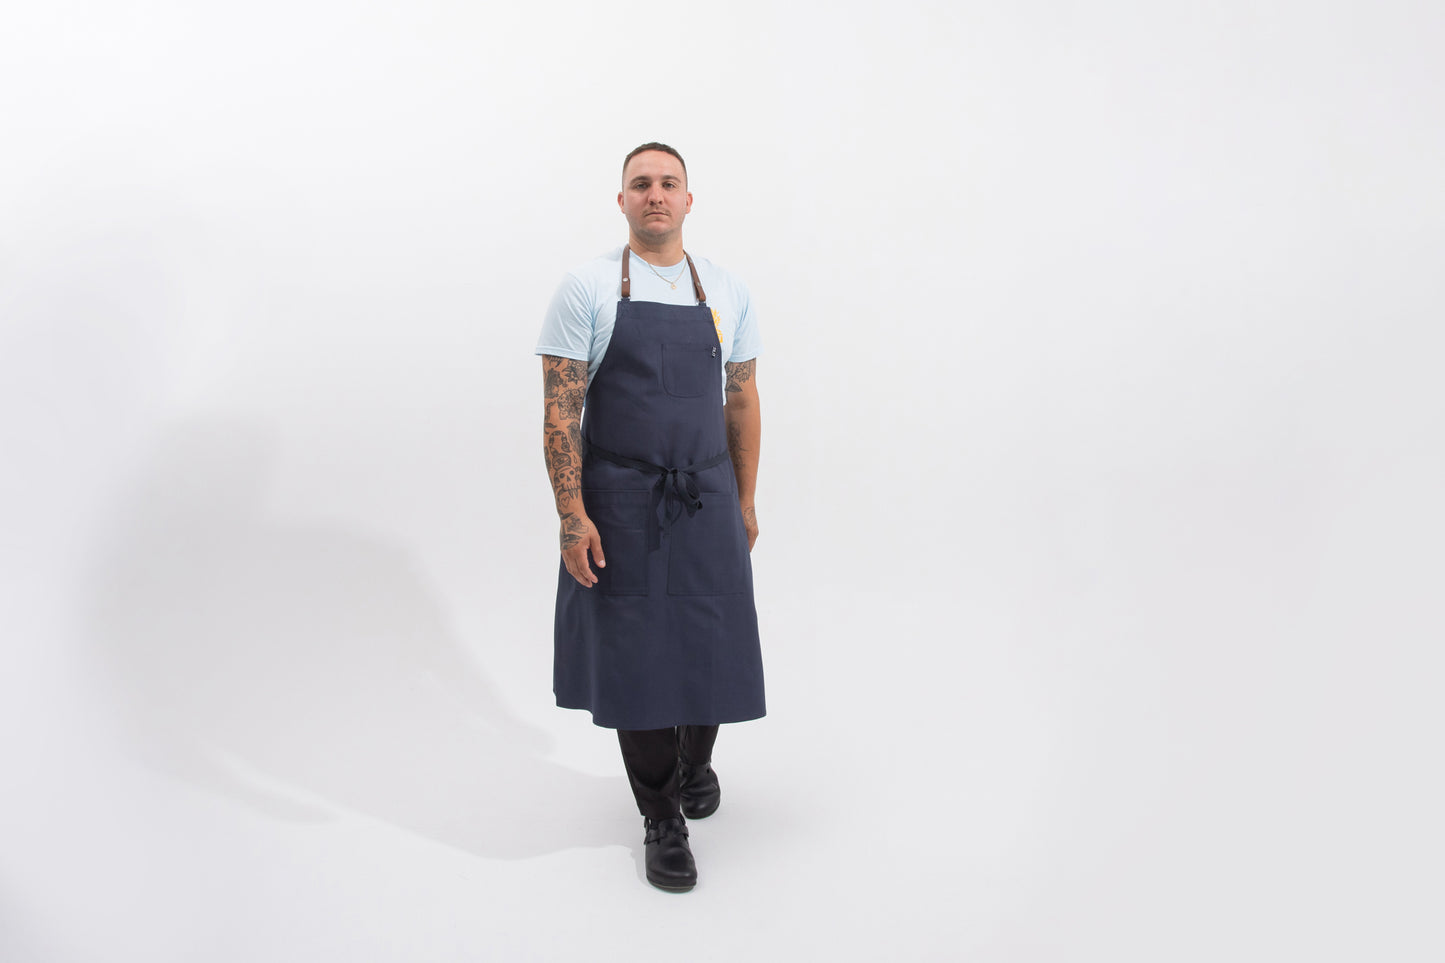 chef aprons for sale